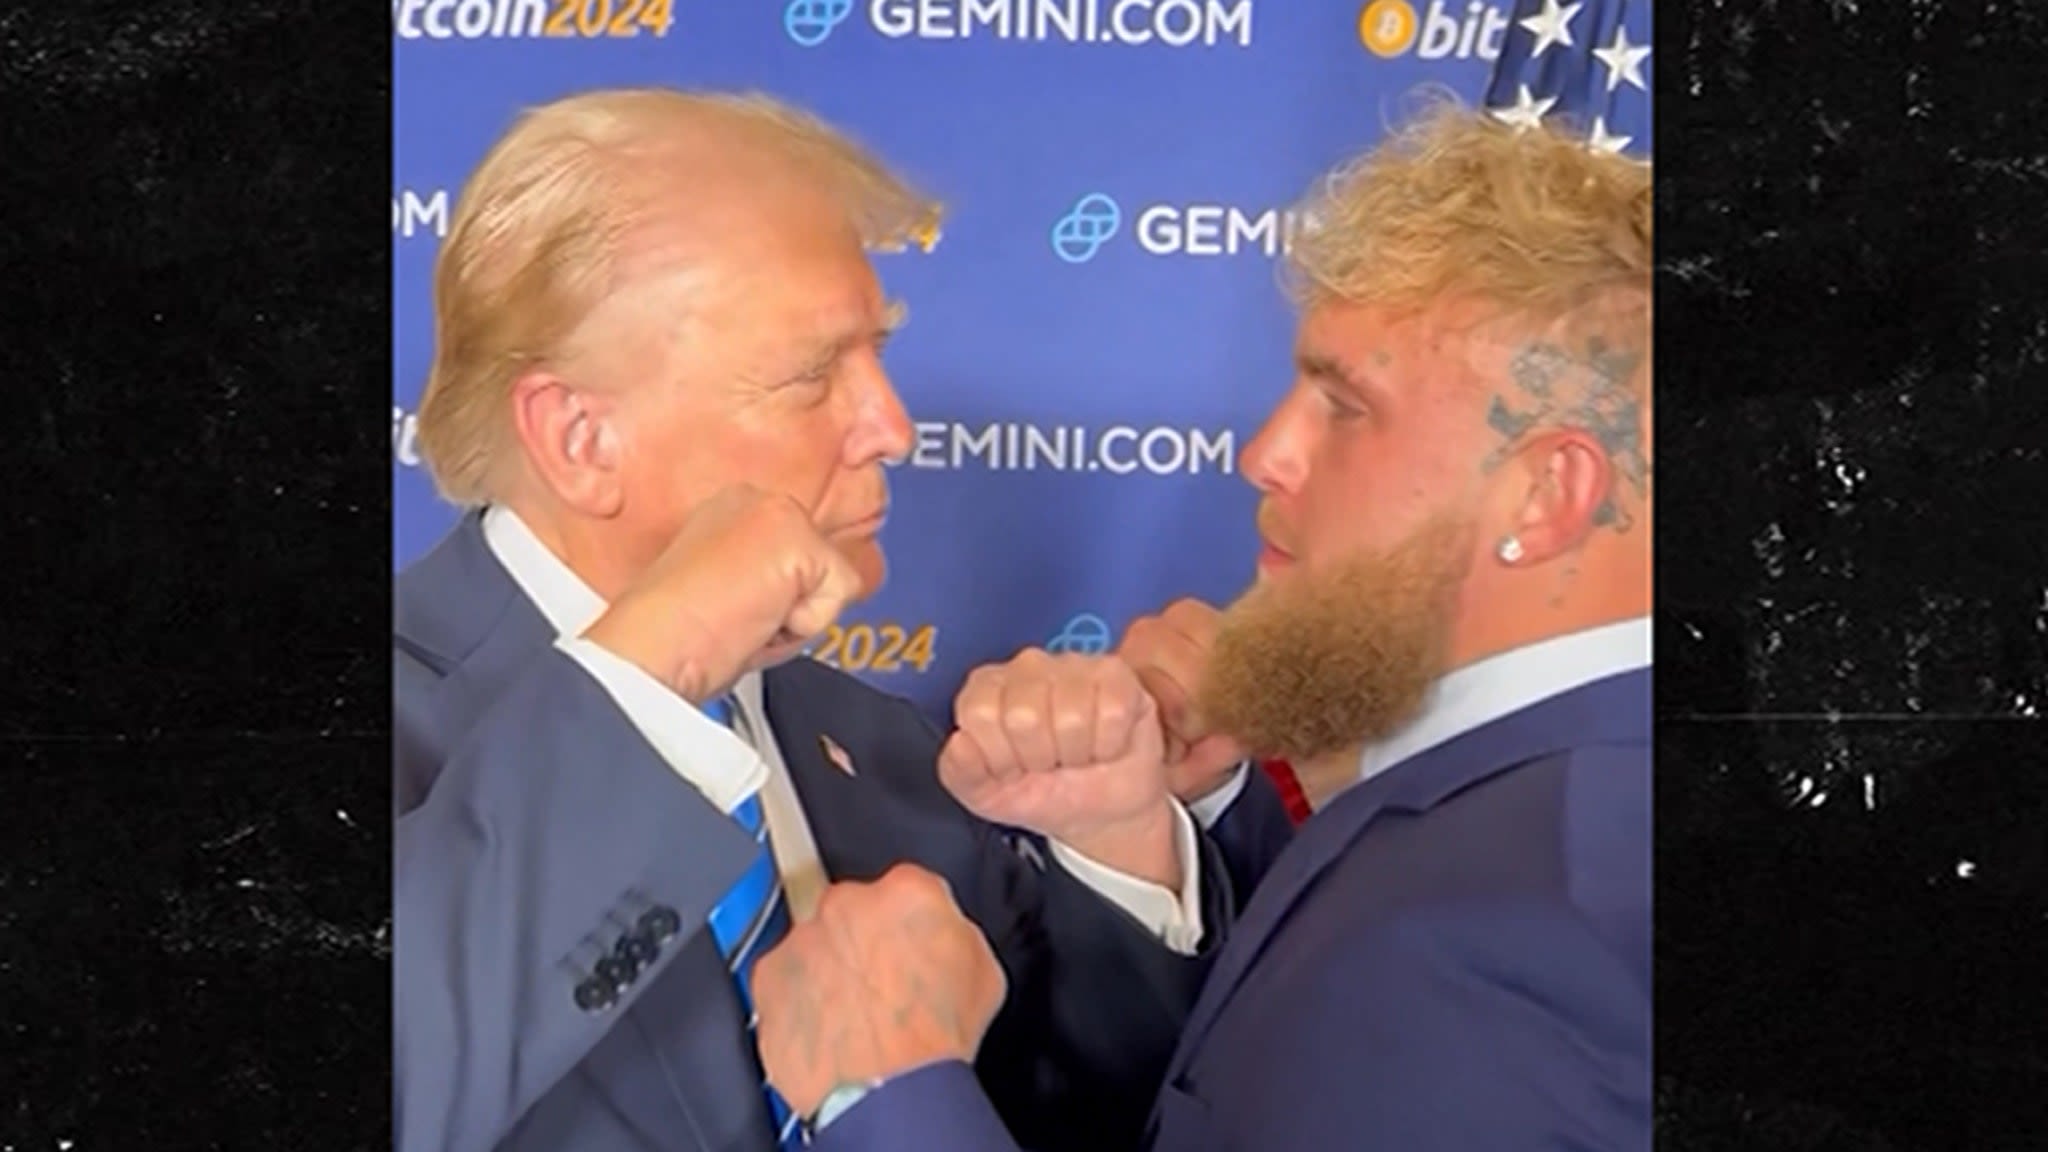 Jake Paul Squares Up With Donald Trump, Throws Support Behind Former President